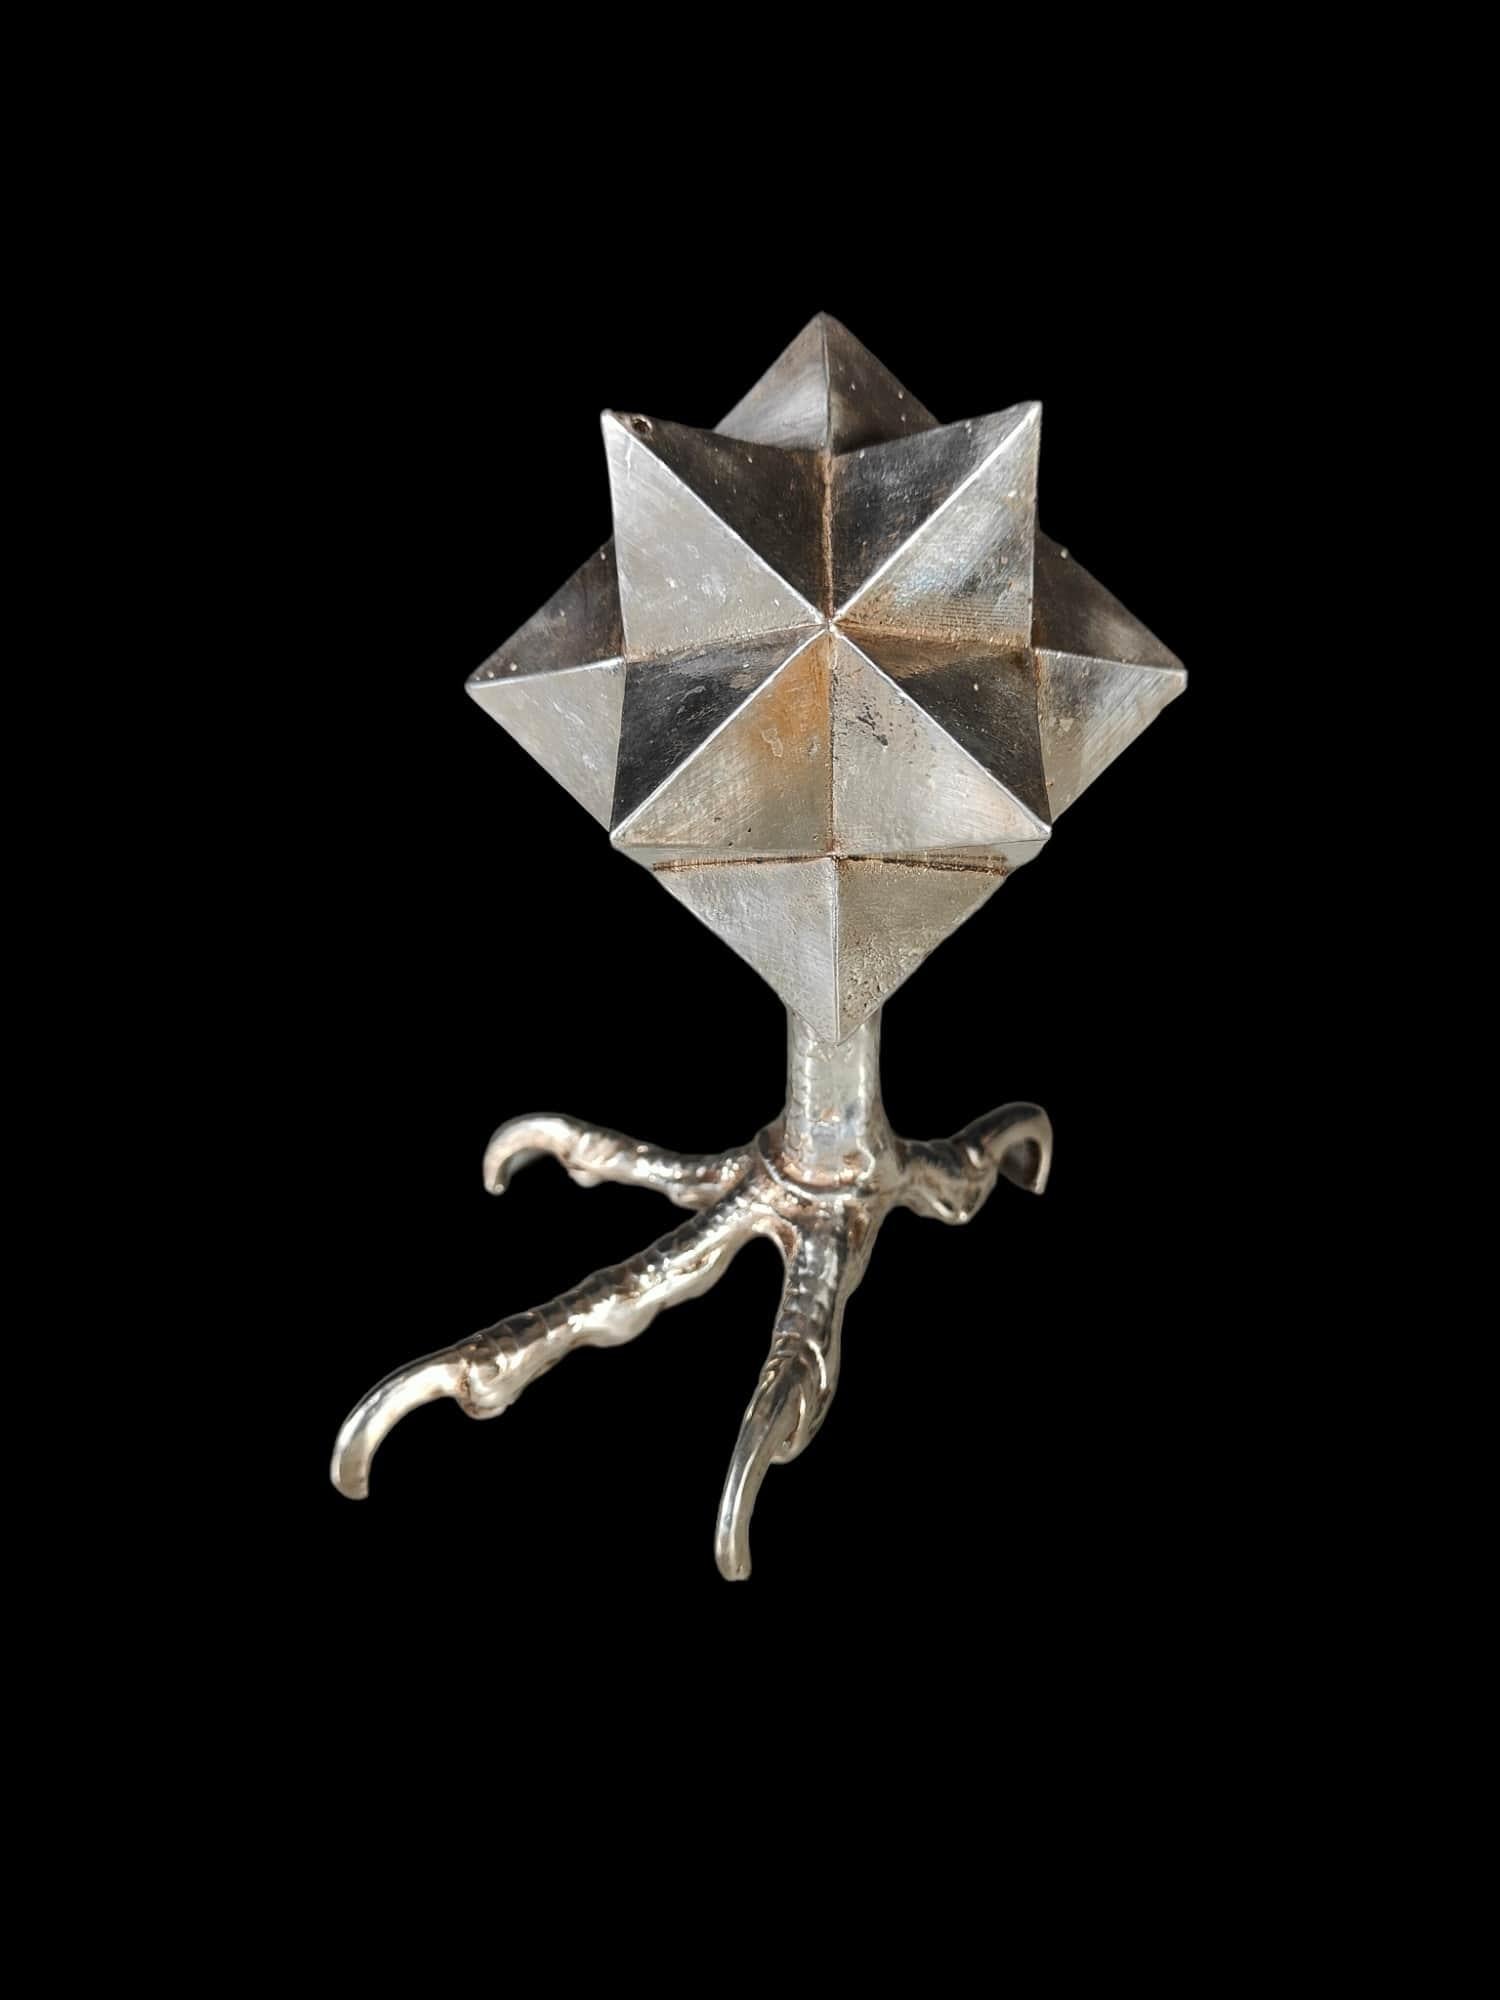 Metallic Polyhedron From The 19th Century – Hexaoctahedron With 48 Faces For Sale 4